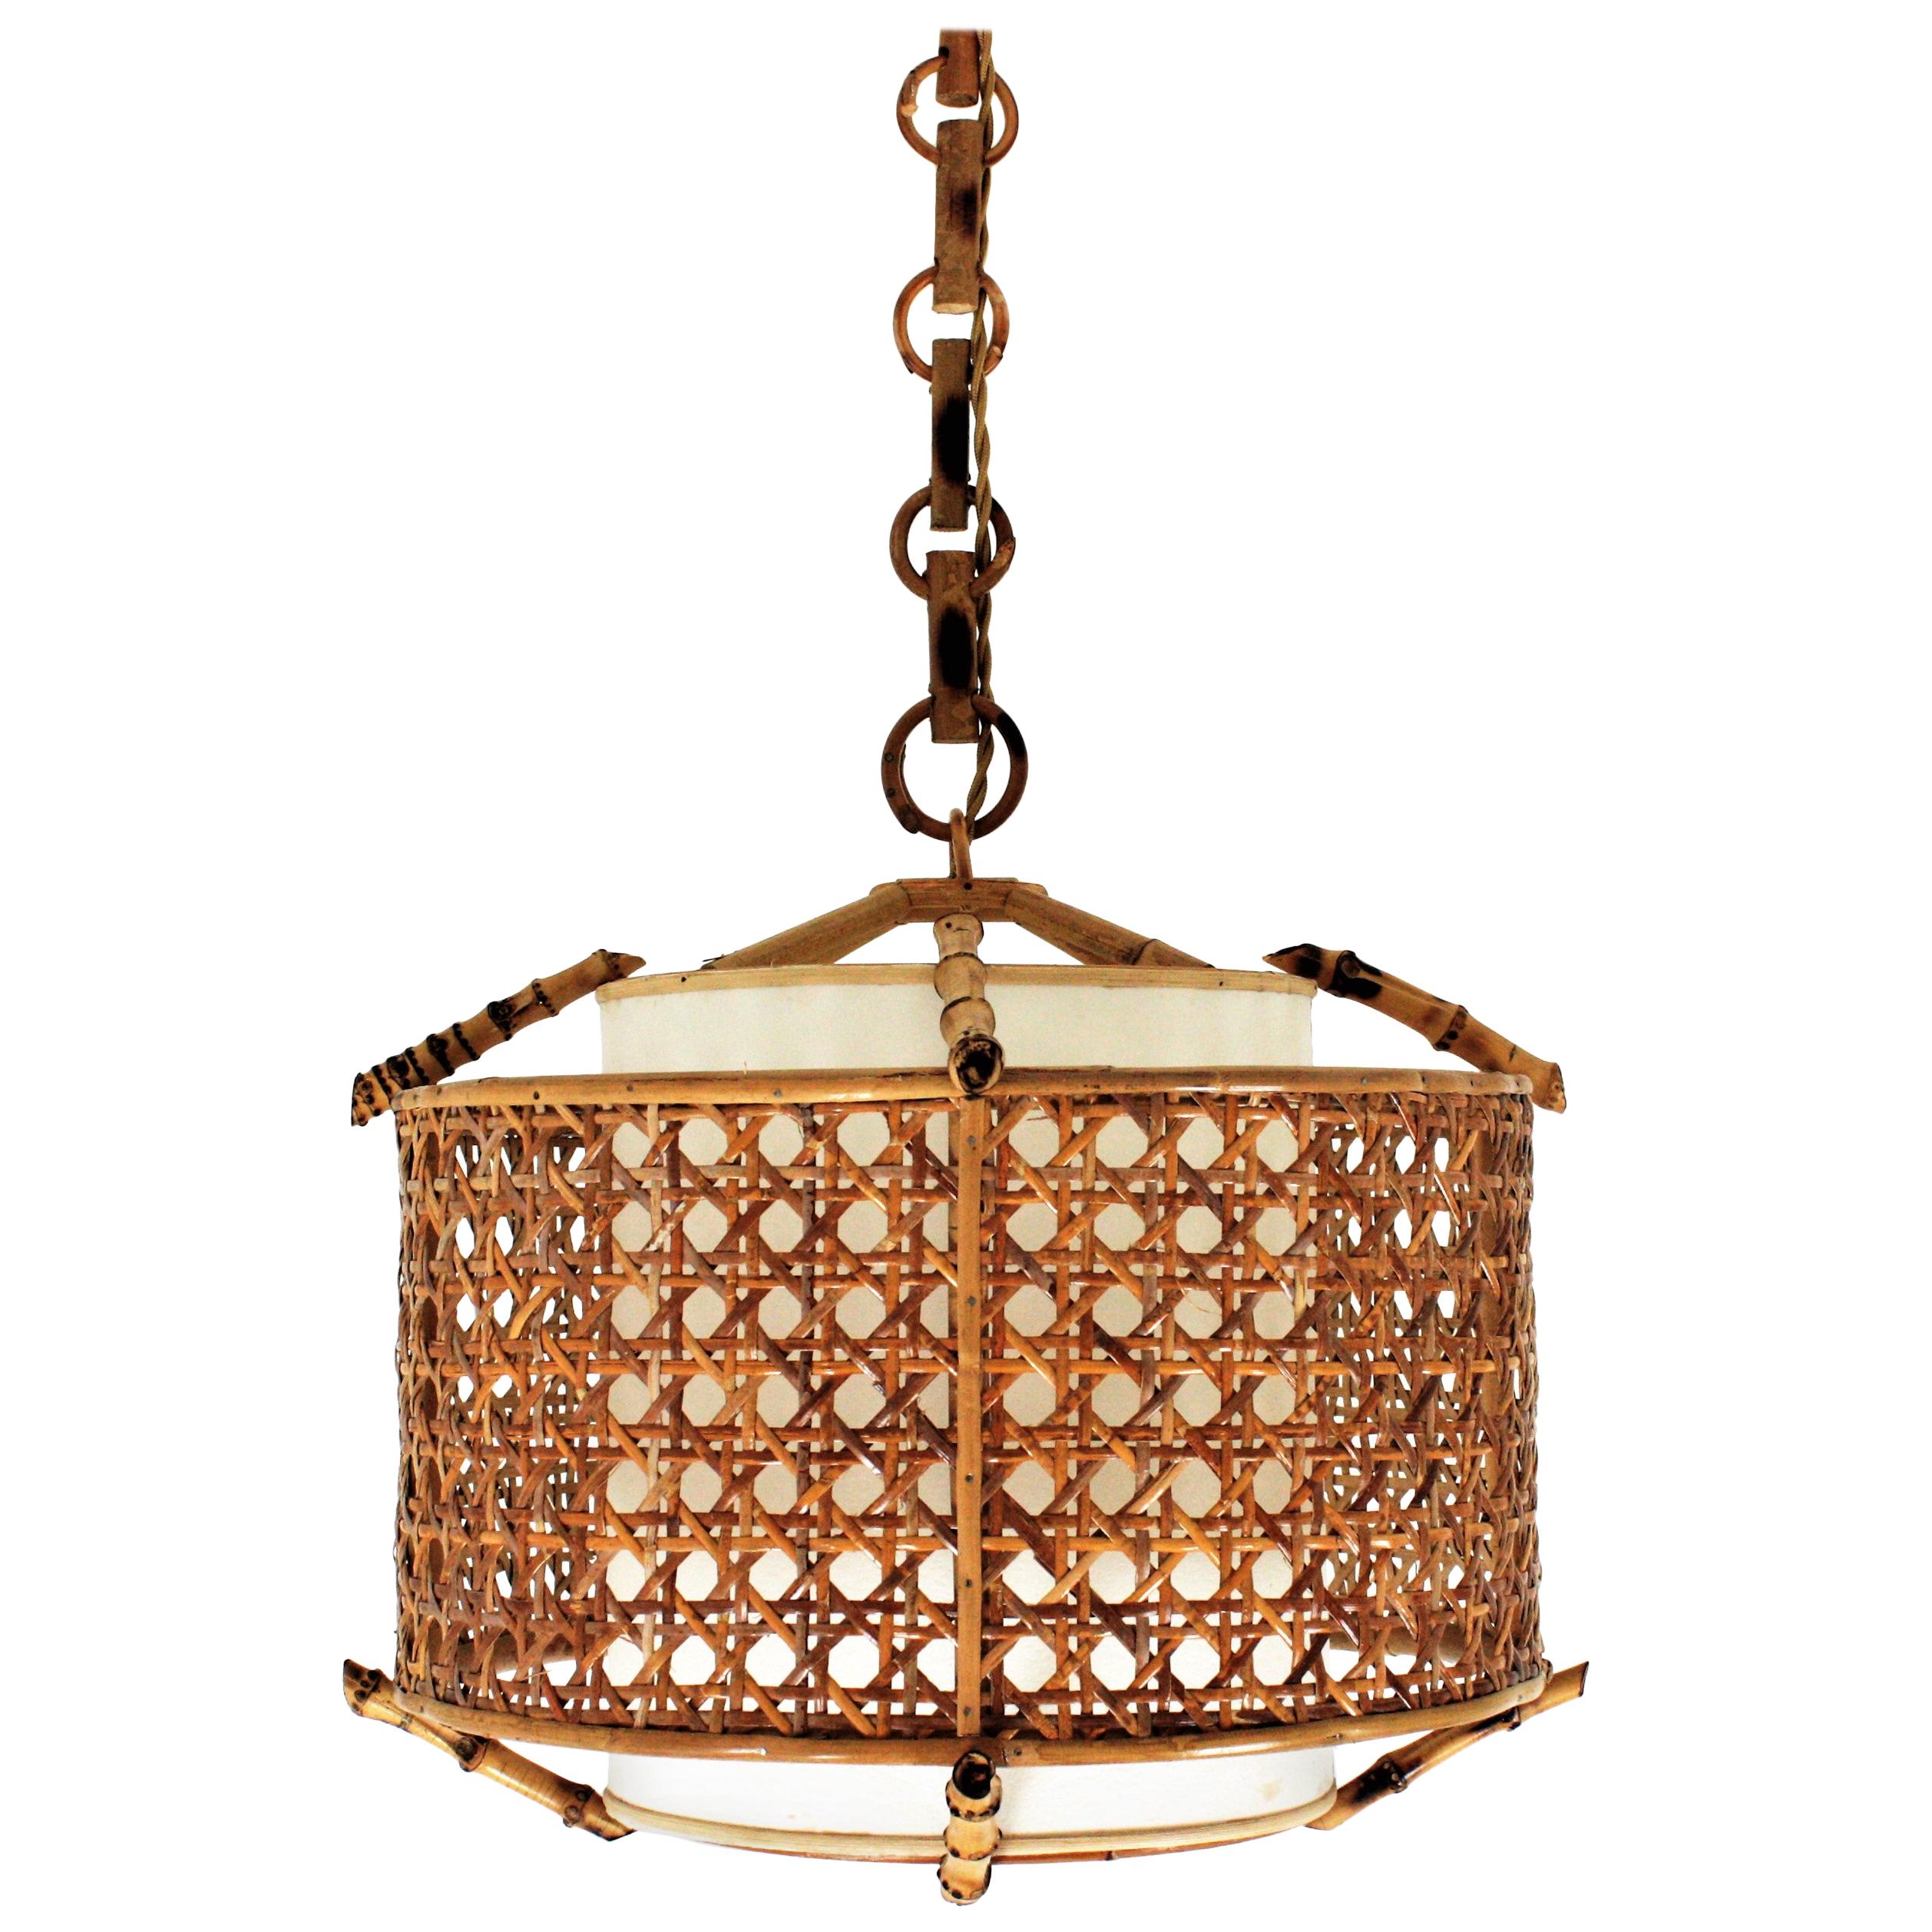 Bamboo Rattan and Wicker Weave Drum Pendant Lamp or Lantern with Tiki Accents